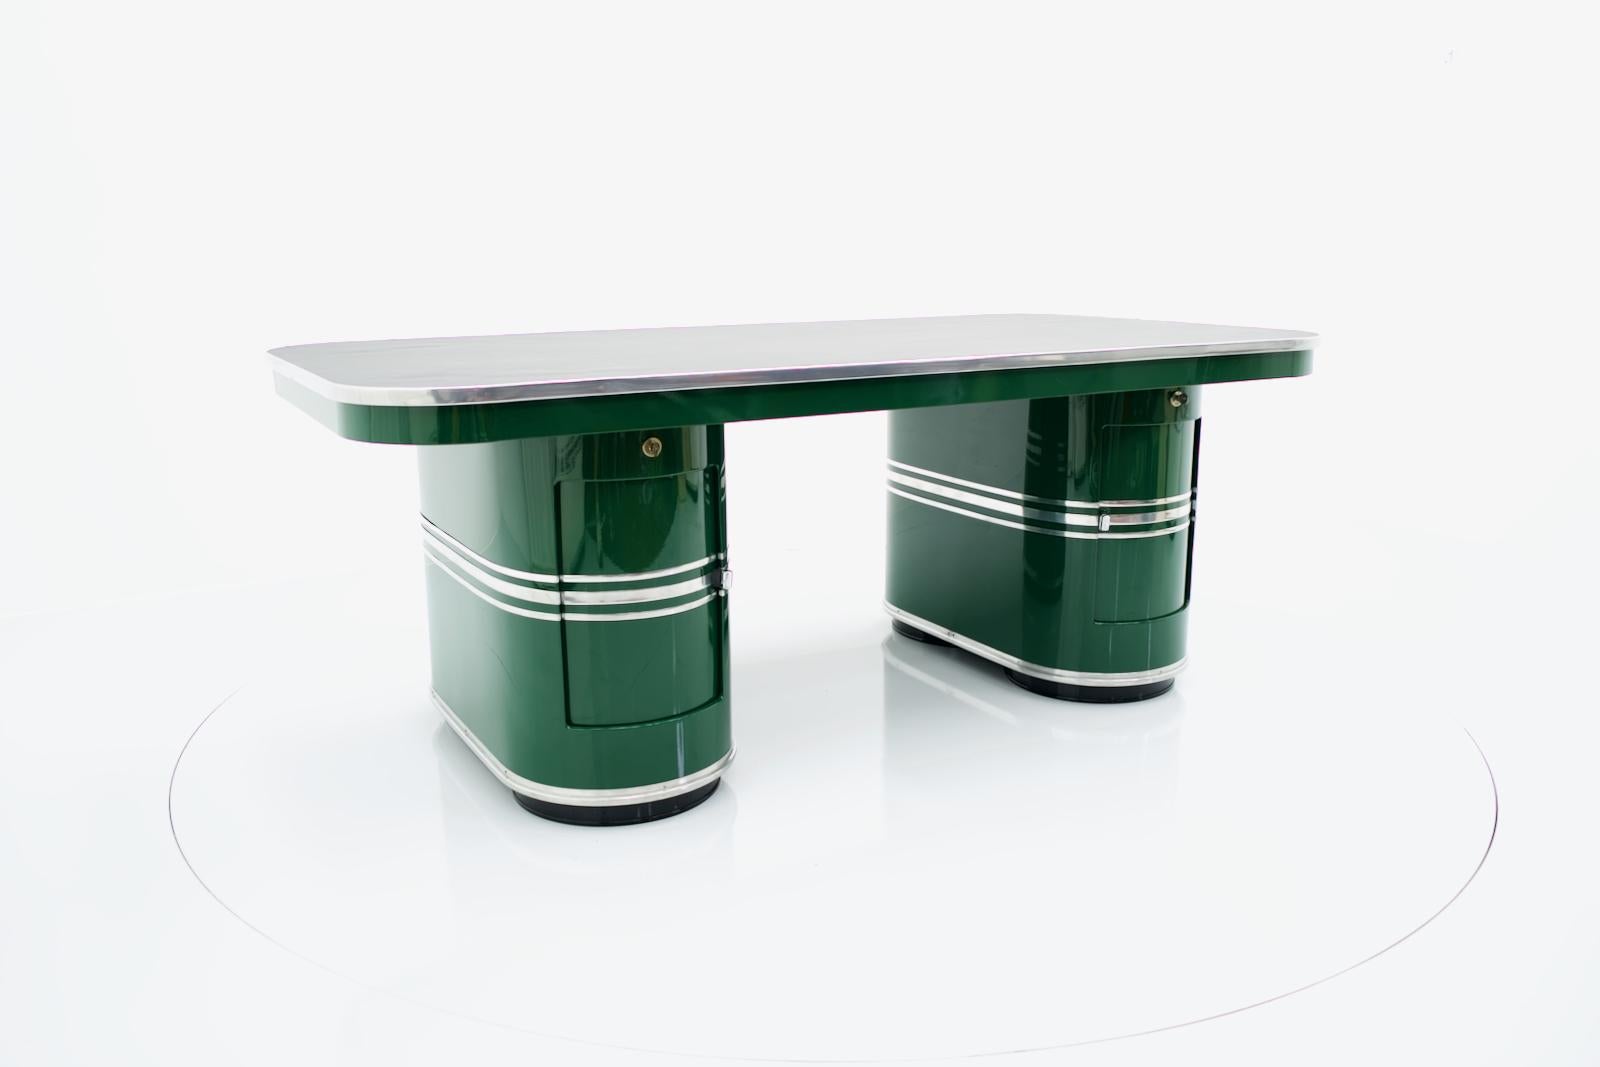 Mauser Rundform 'Berlin' Writing Desk in British Racing Green, Germany, 1950 For Sale 1